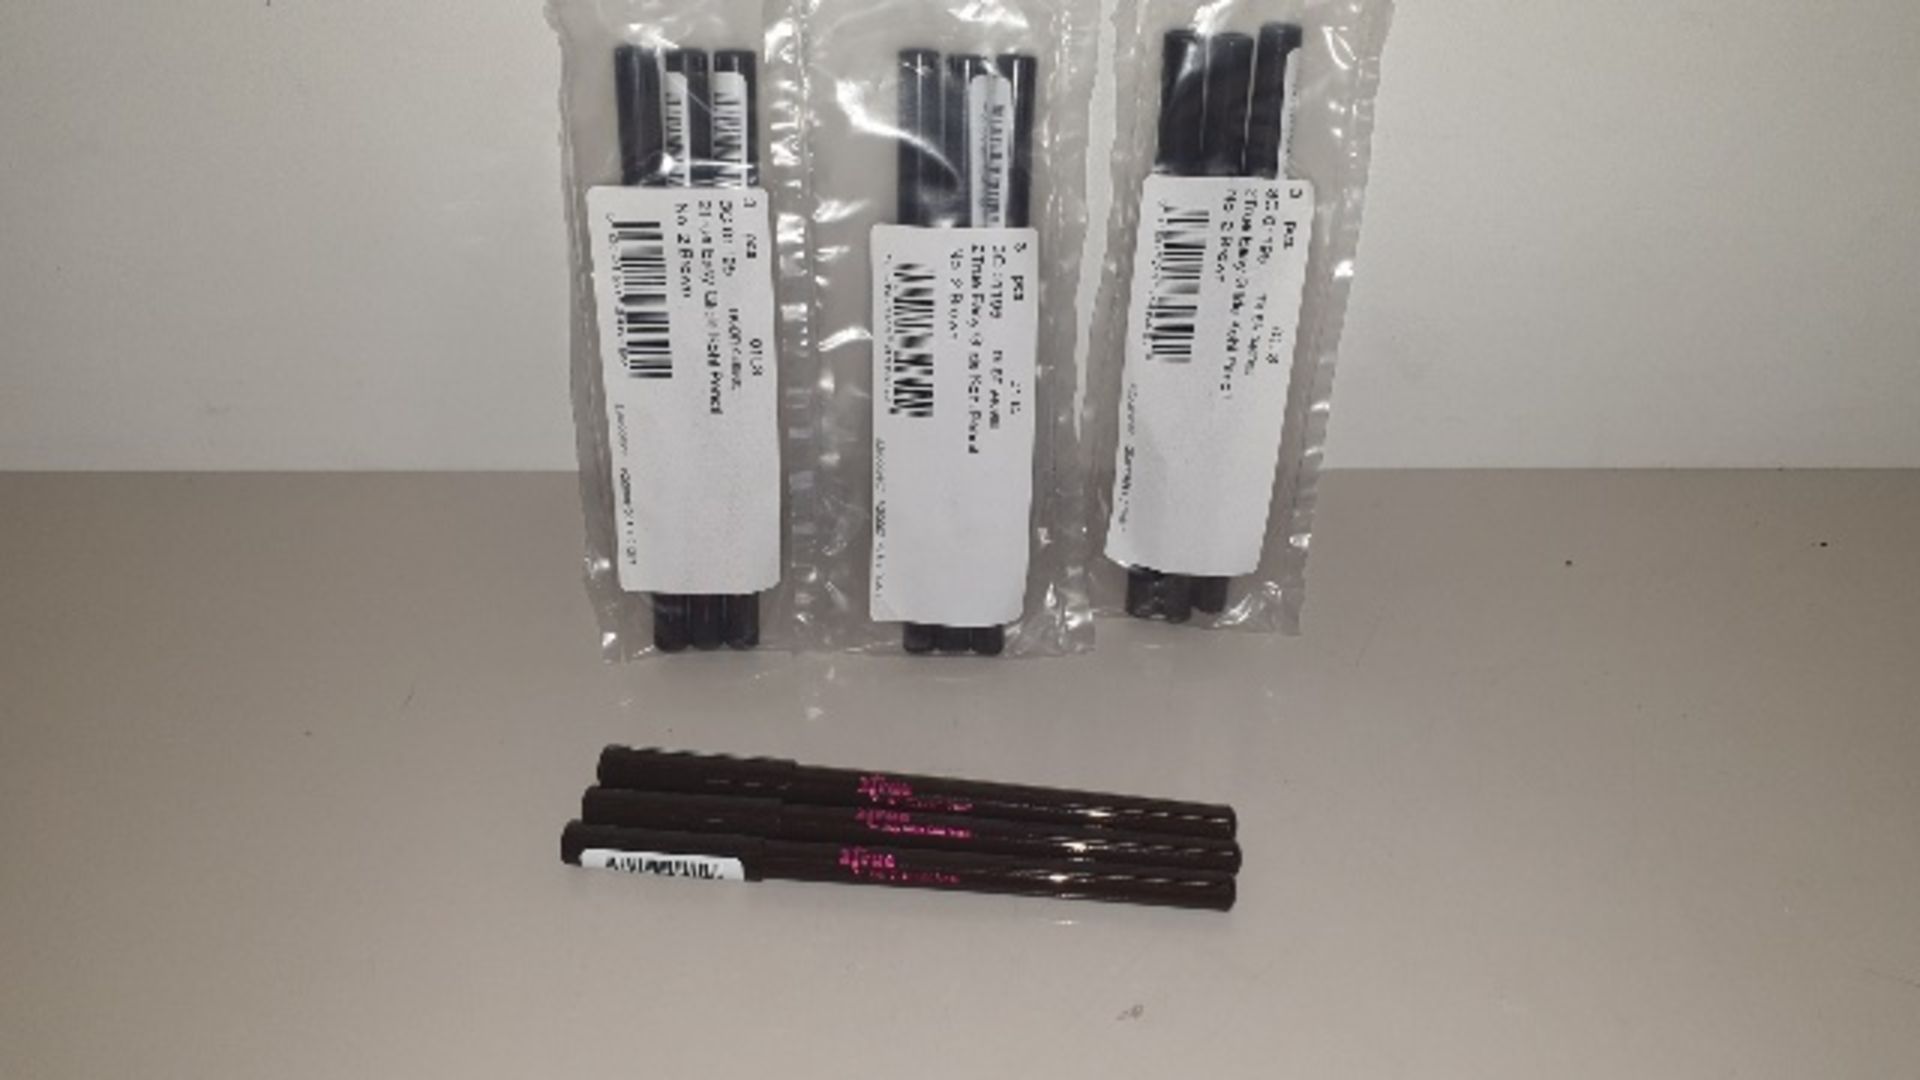 222 X BRAND NEW 2TRUE EASY GLIDE KOHL PENCIL NO. 2 BROWN TOTAL RRP. £388